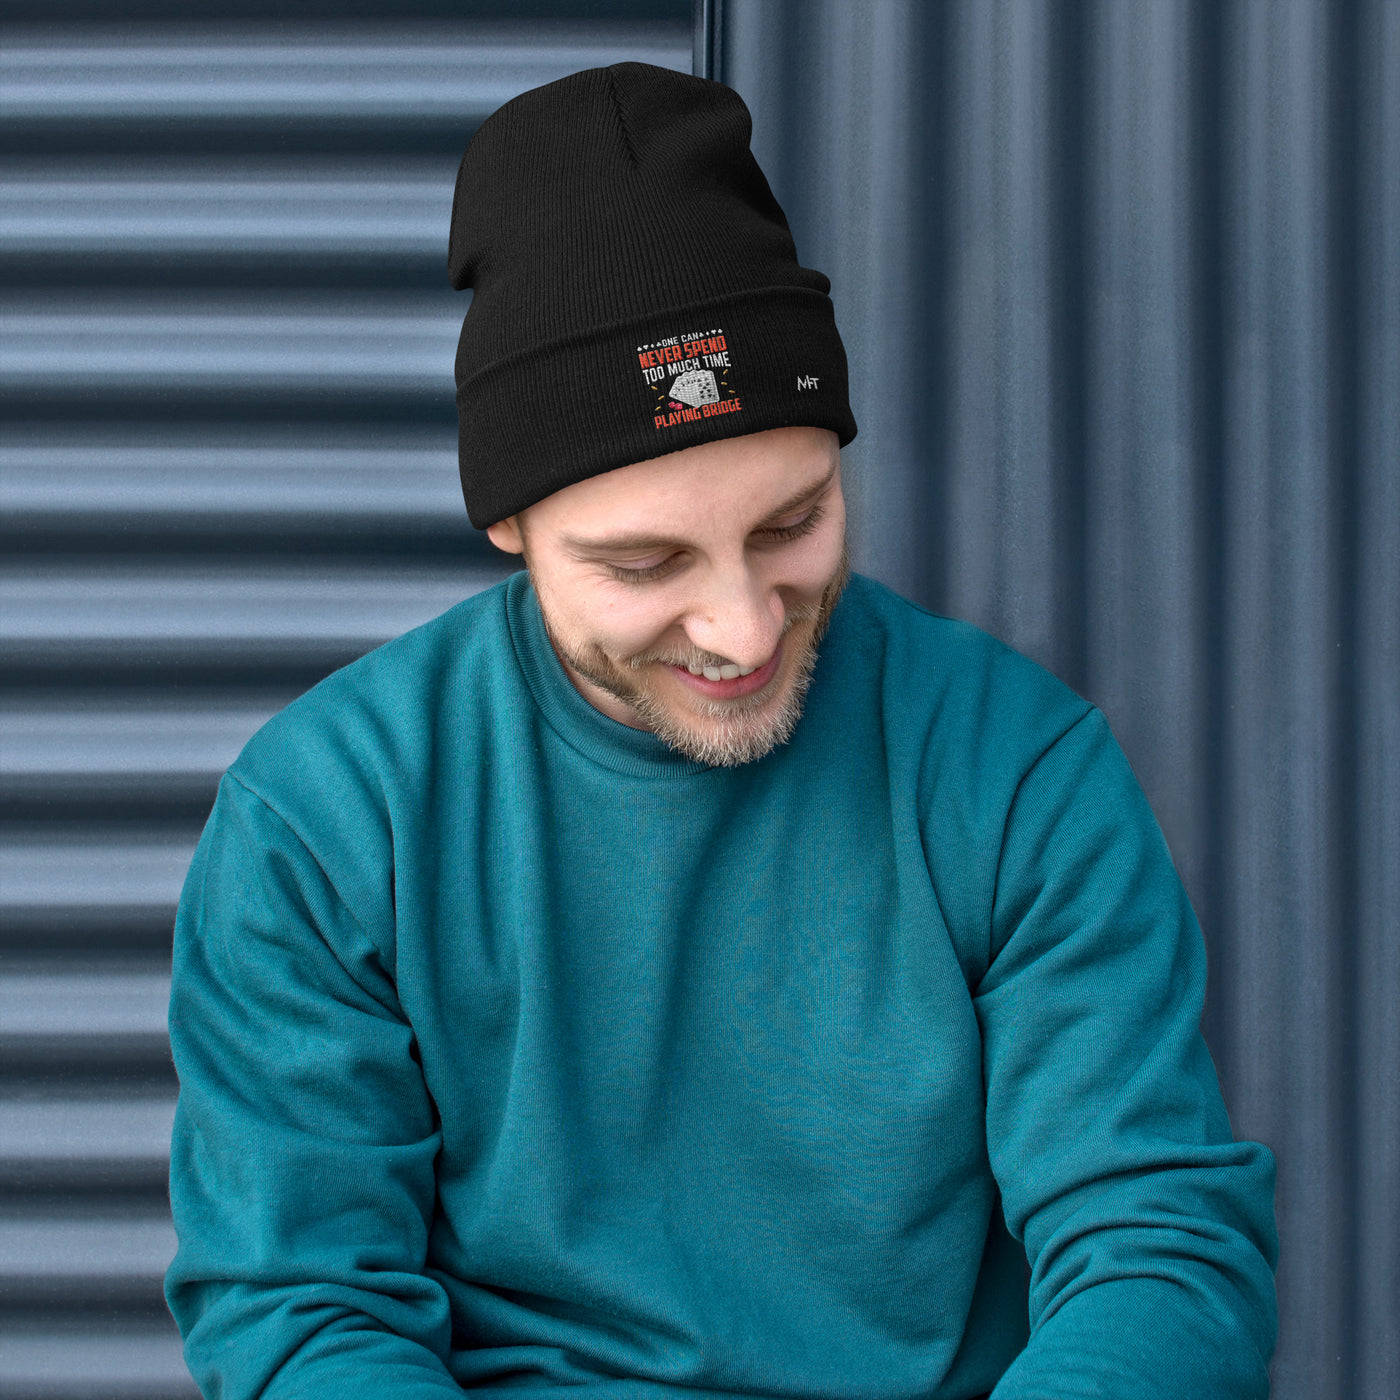 One can never Spend too much Time playing Bridge - Embroidered Beanie